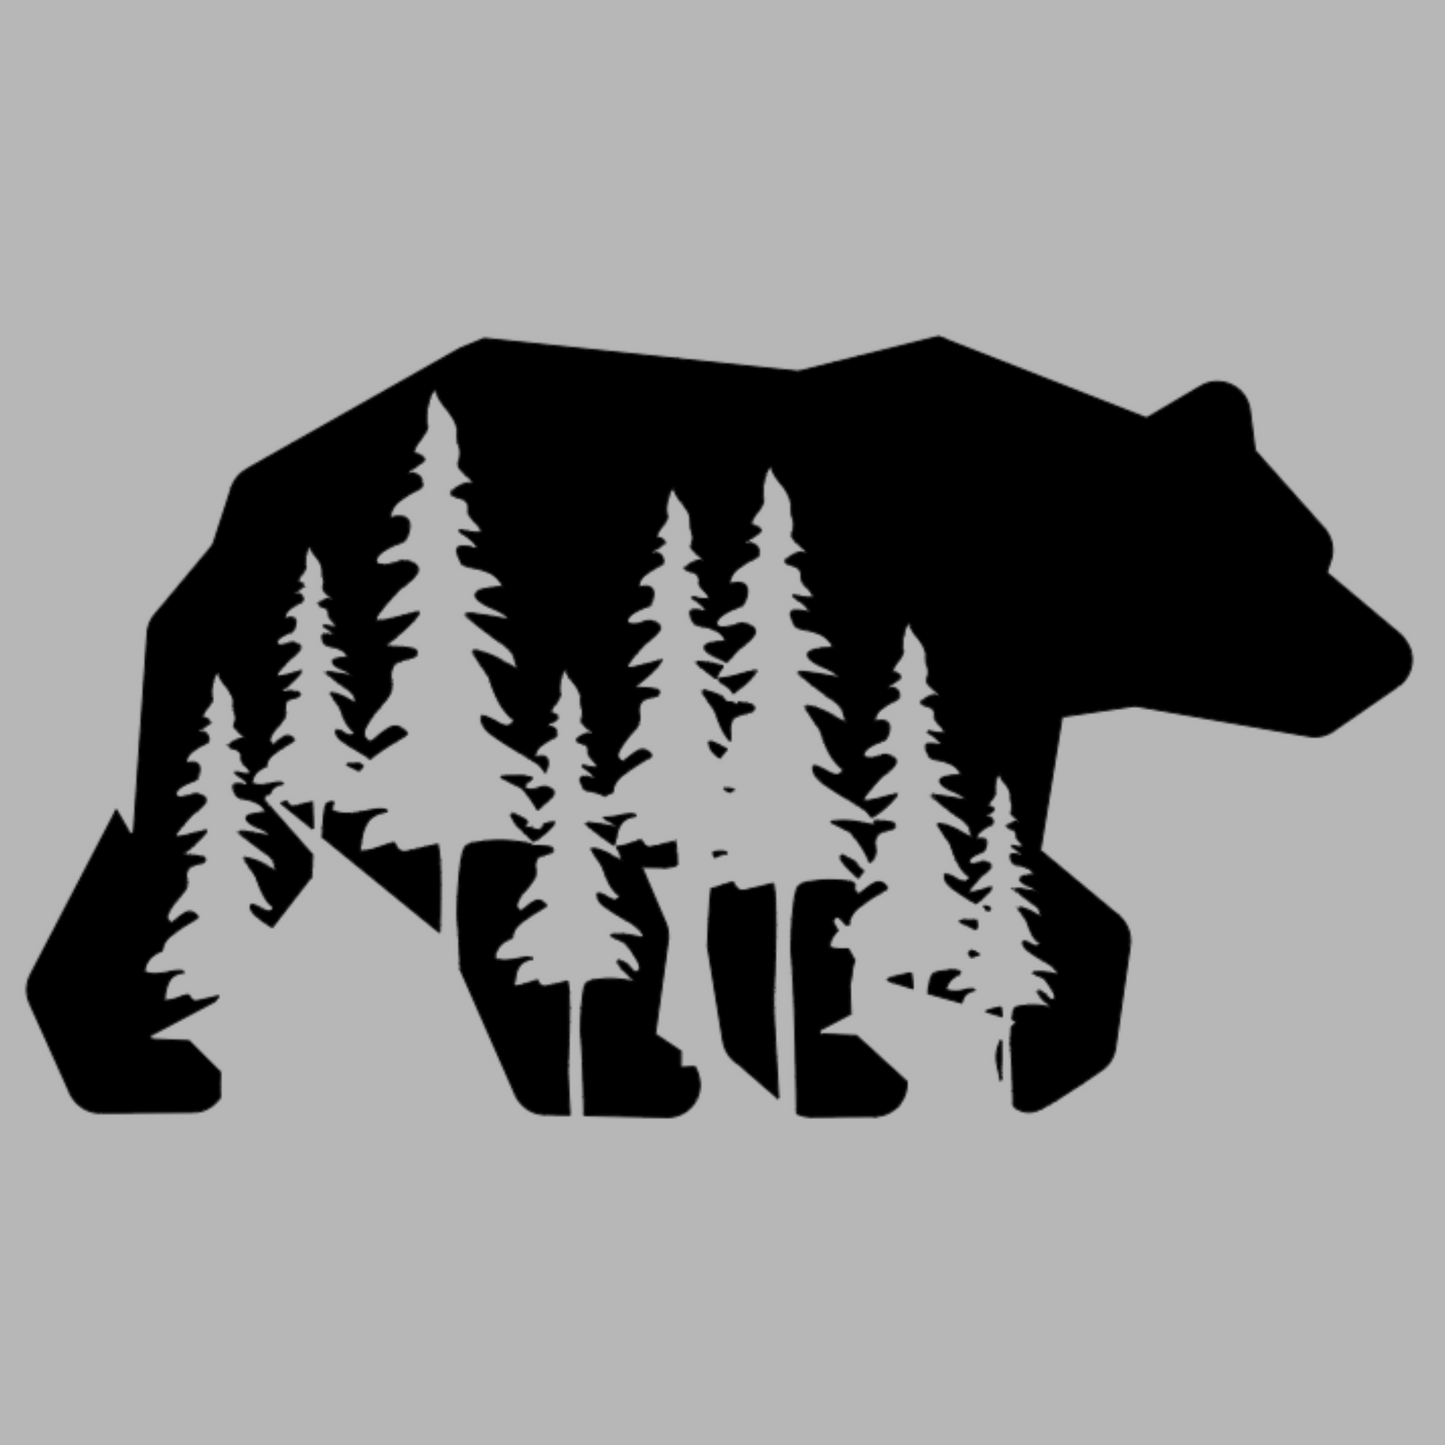 Woodsy Black Bear Design with Pine Trees cut into it with a gray background.